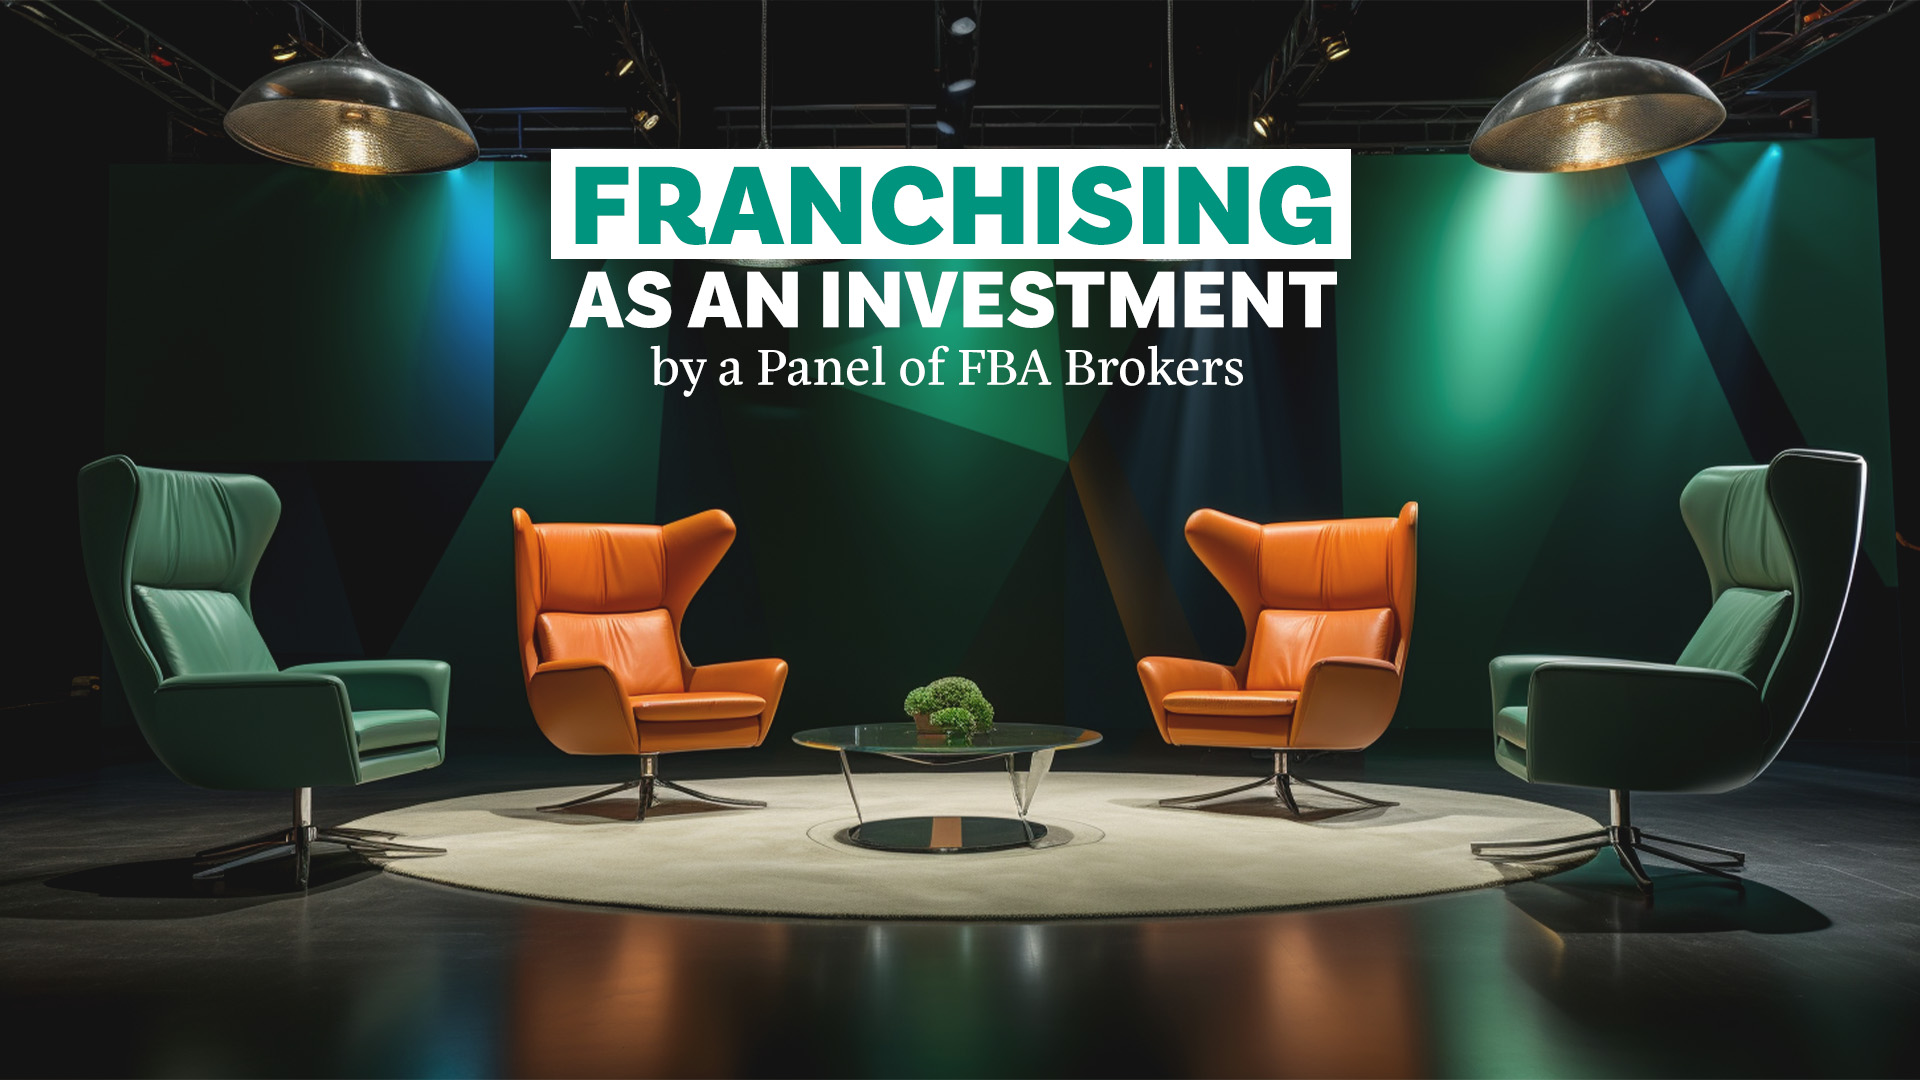 Franchising as an Investment